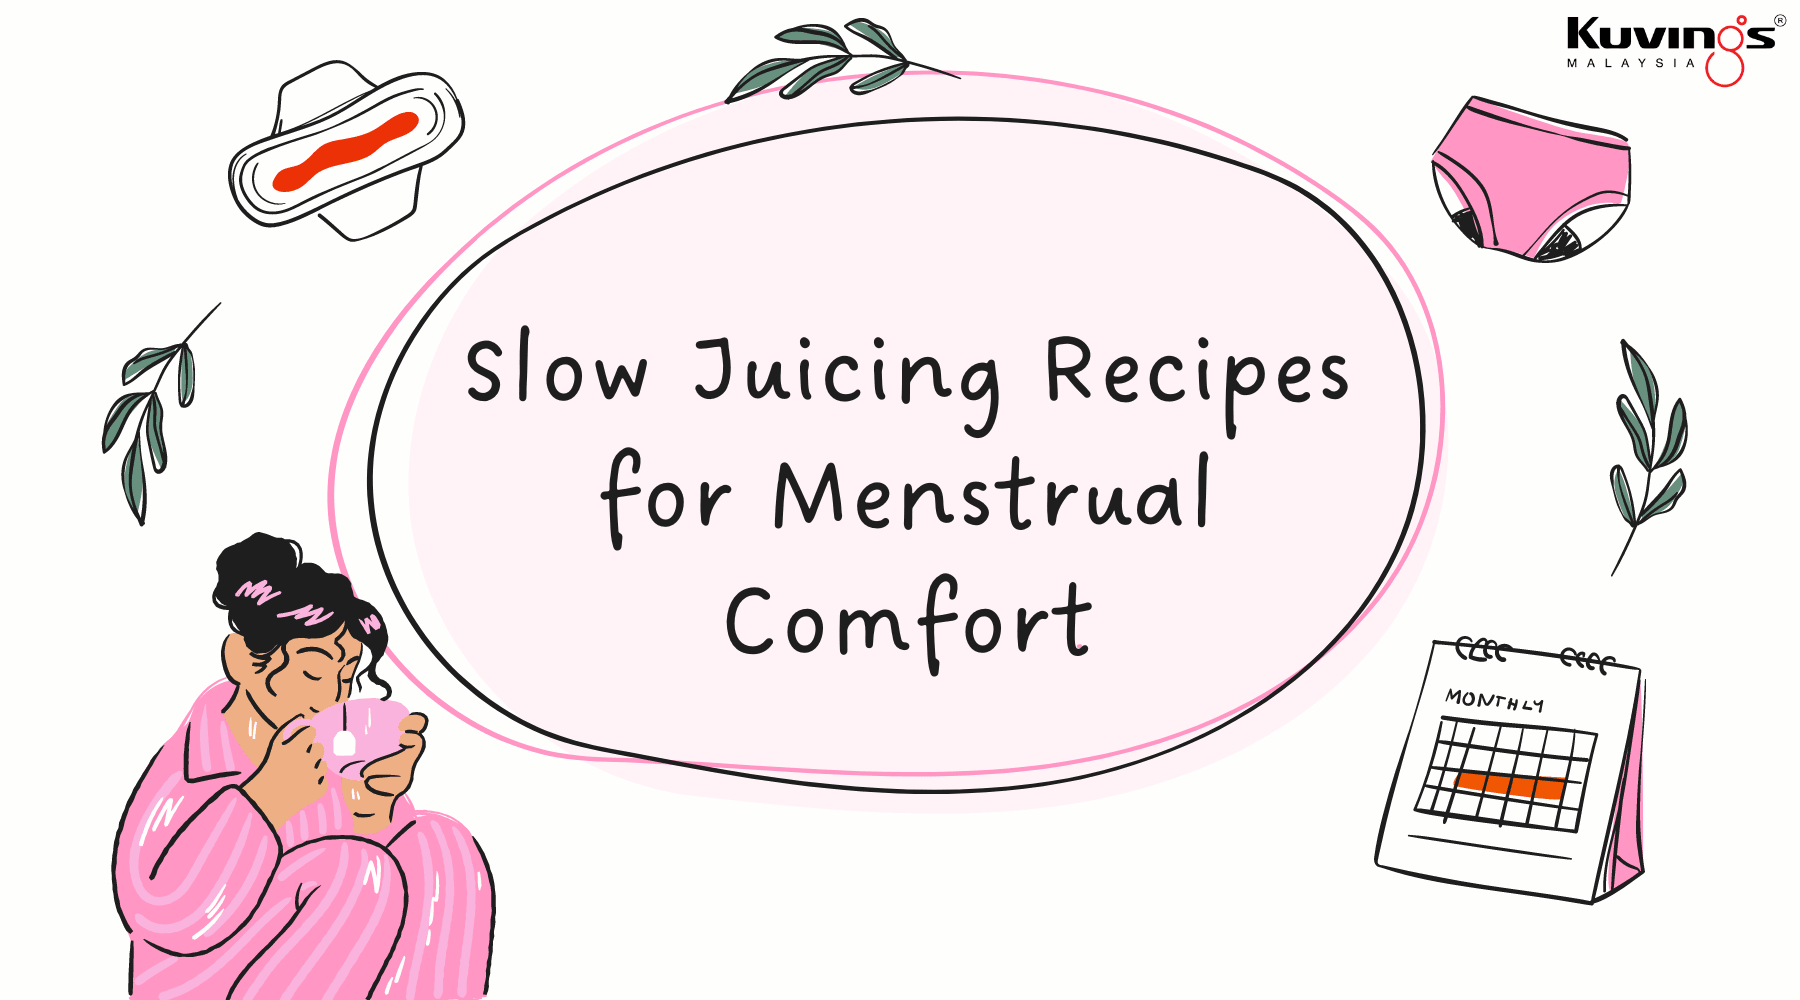 Slow Juicing Recipes for Menstrual Comfort - Kuvings.my